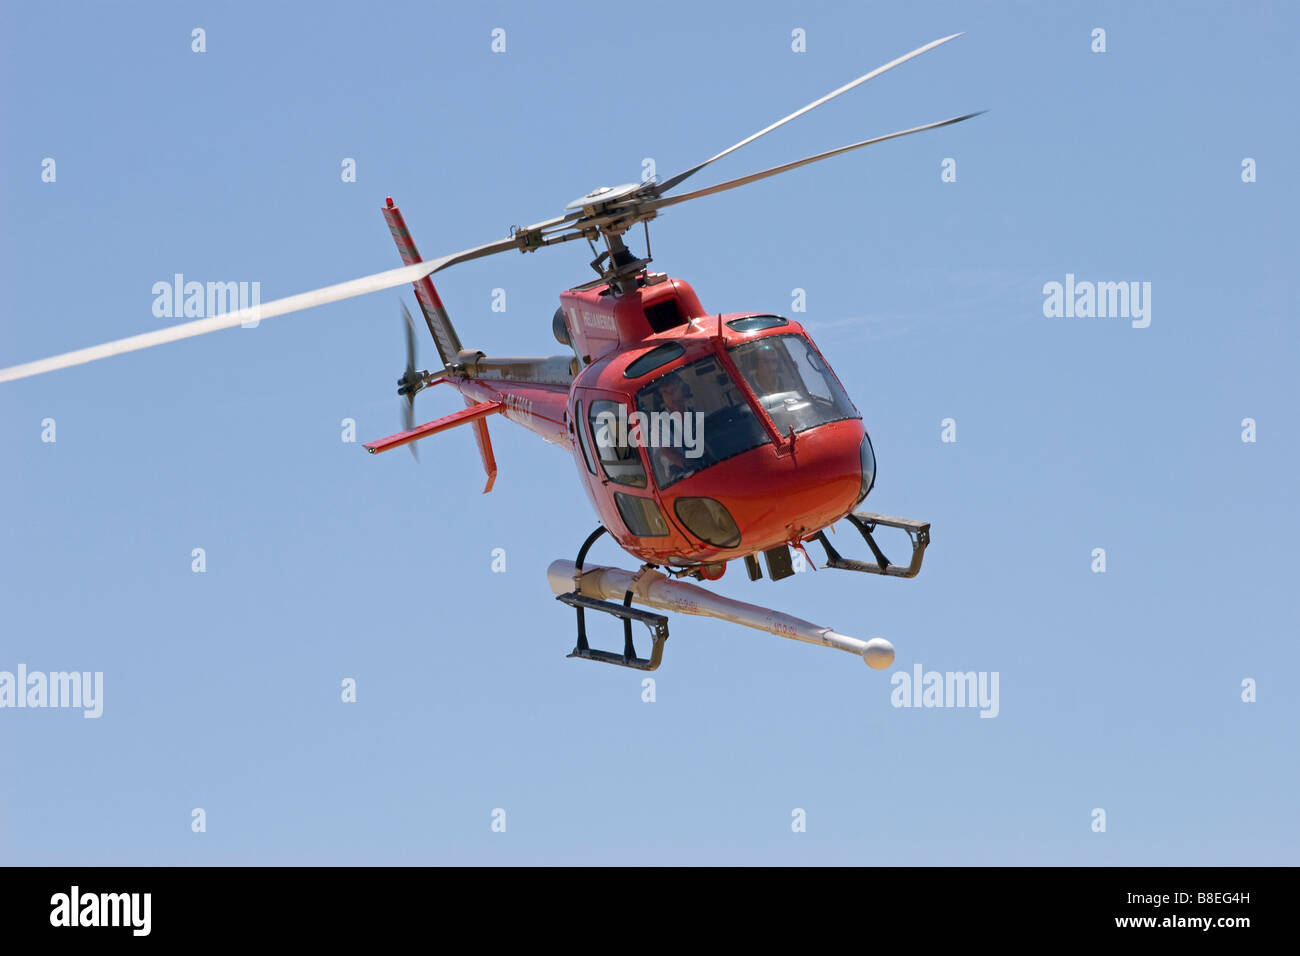 helicopter aerial work survey mining AS350 astar eurocopter Stock Photo